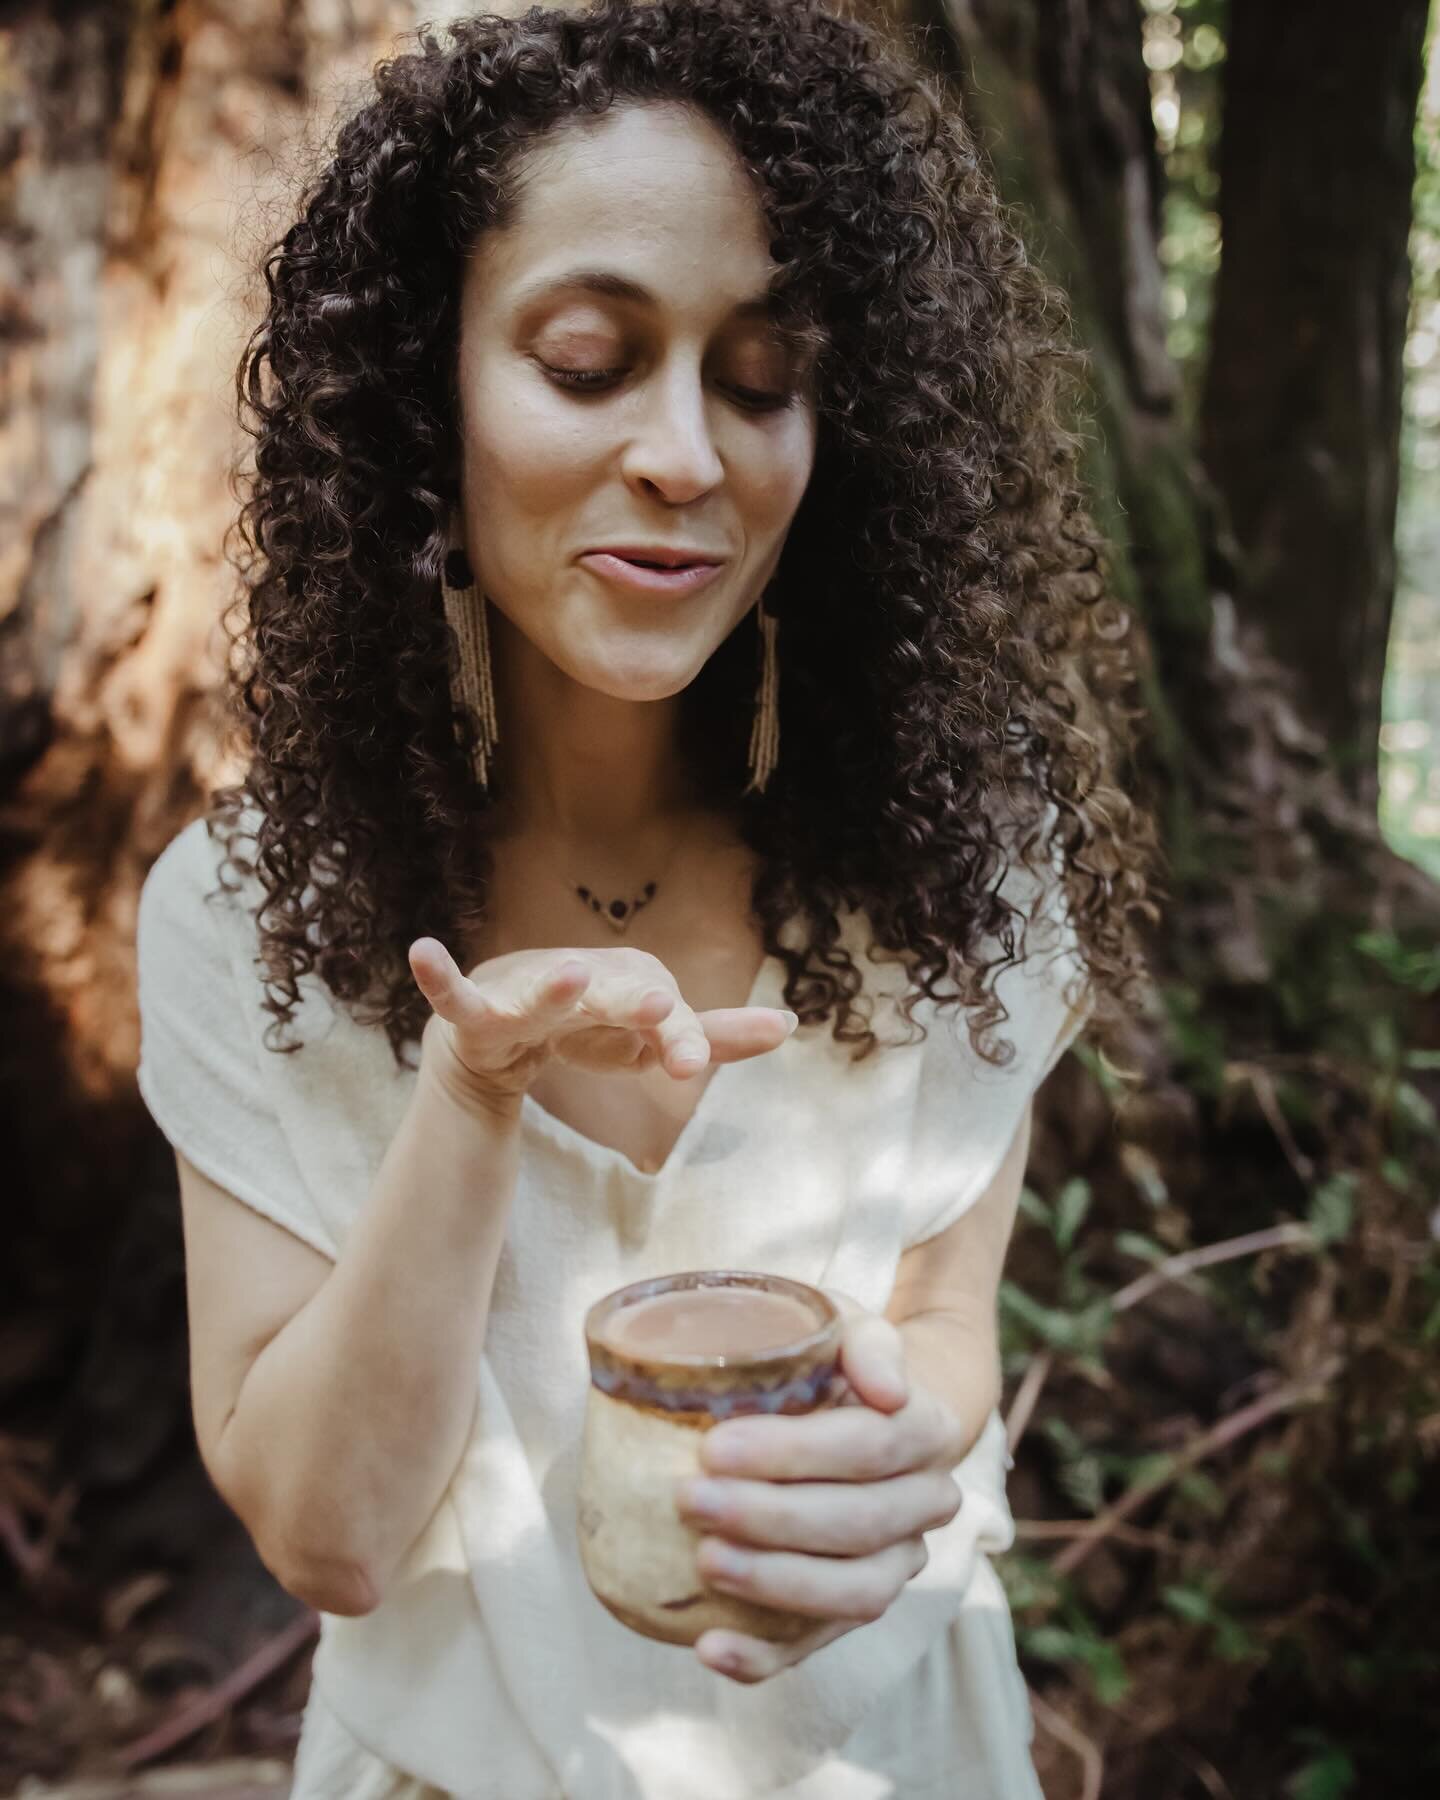 📣 Save the date: Next Saturday 3/23: Serving up Spring Equinox cacao, chanting and song with @soulbroantonio Antonio Aversano in Rohnert Park! 💗🎶 11am-2pm

I&rsquo;m excited and delighted to offer this beautiful gathering of music and chocolate to